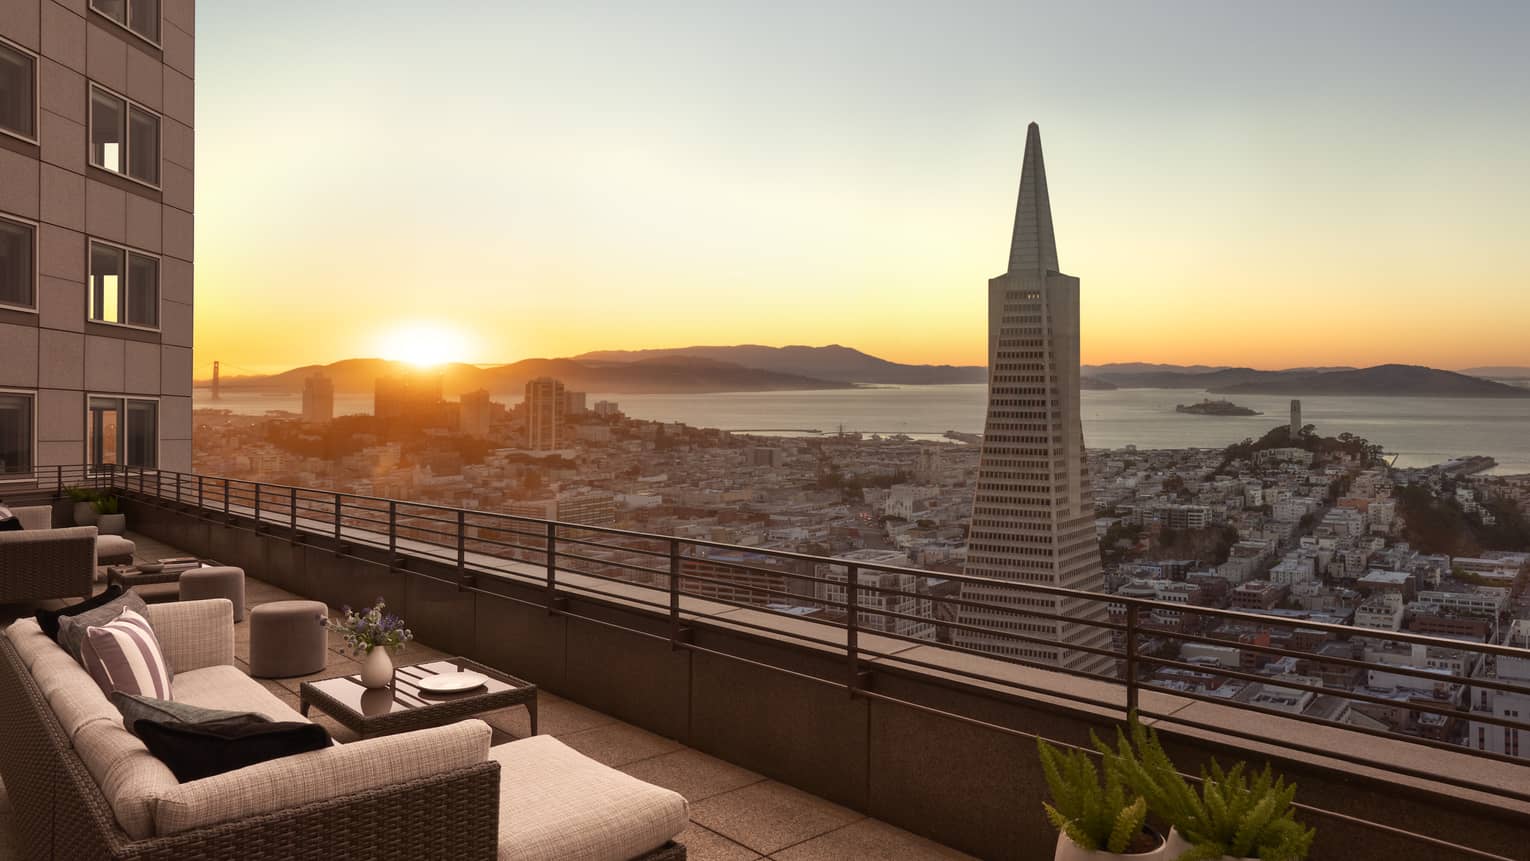 Golden Gate Terrace Suite balcony overlooking San Francisco Bay at sunset